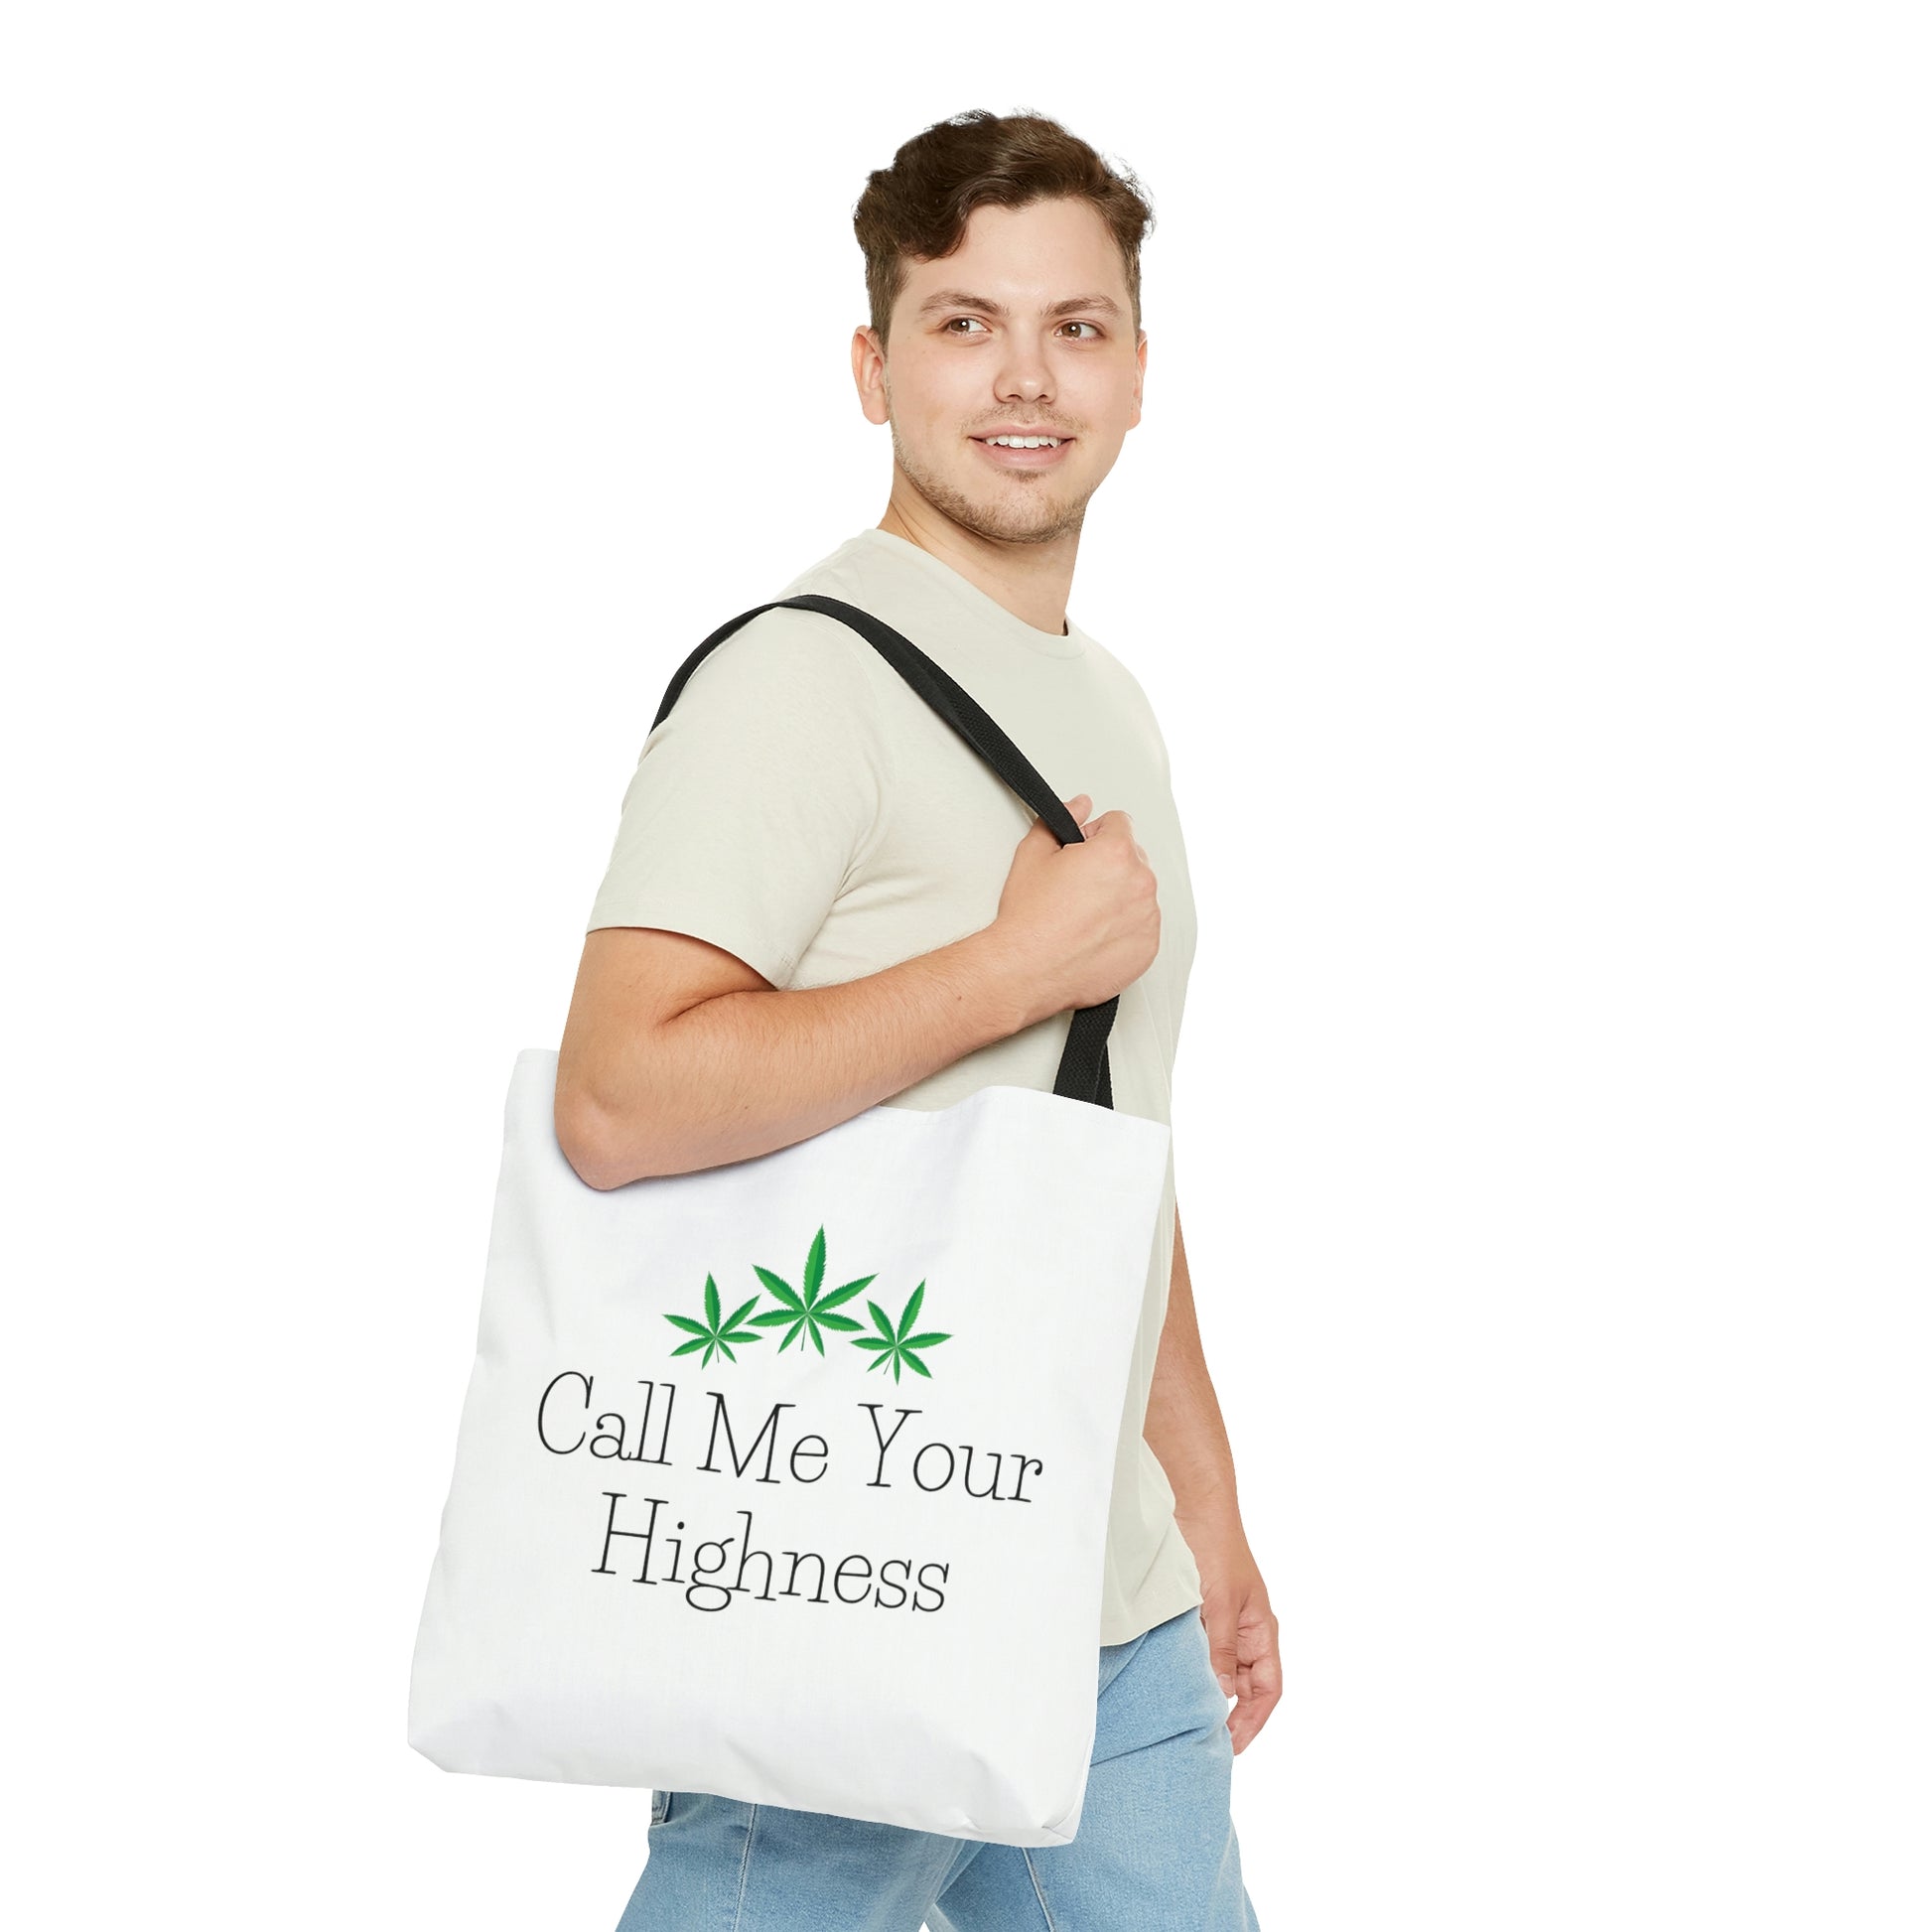 A man walks brightly with a smile while he wears the Call Me Your Highness Green Leaf Tote Bag